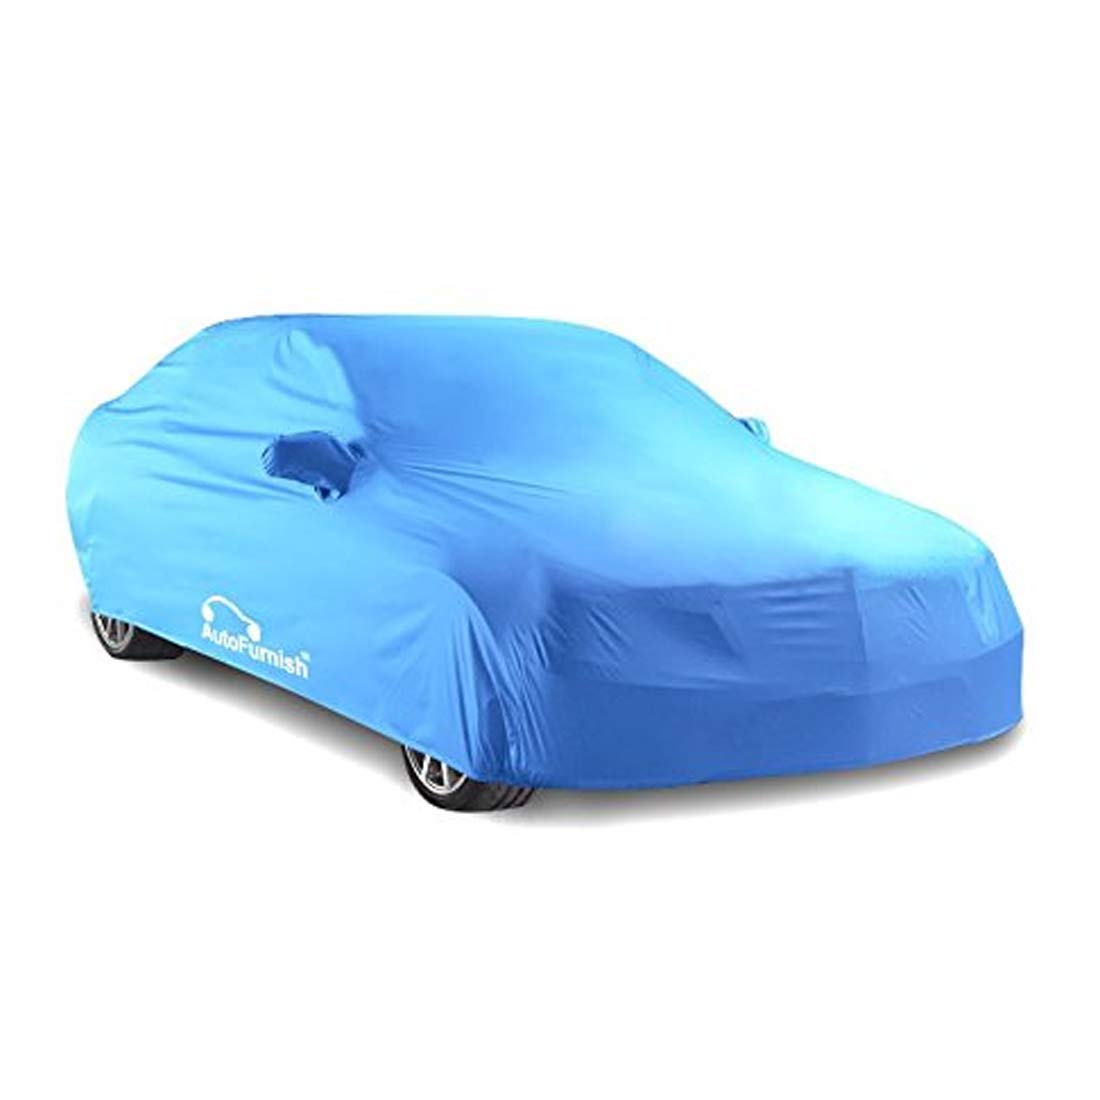 Dustproof Waterproof Car Cover Compatible with Audi A3 A4 A5 A6 A7